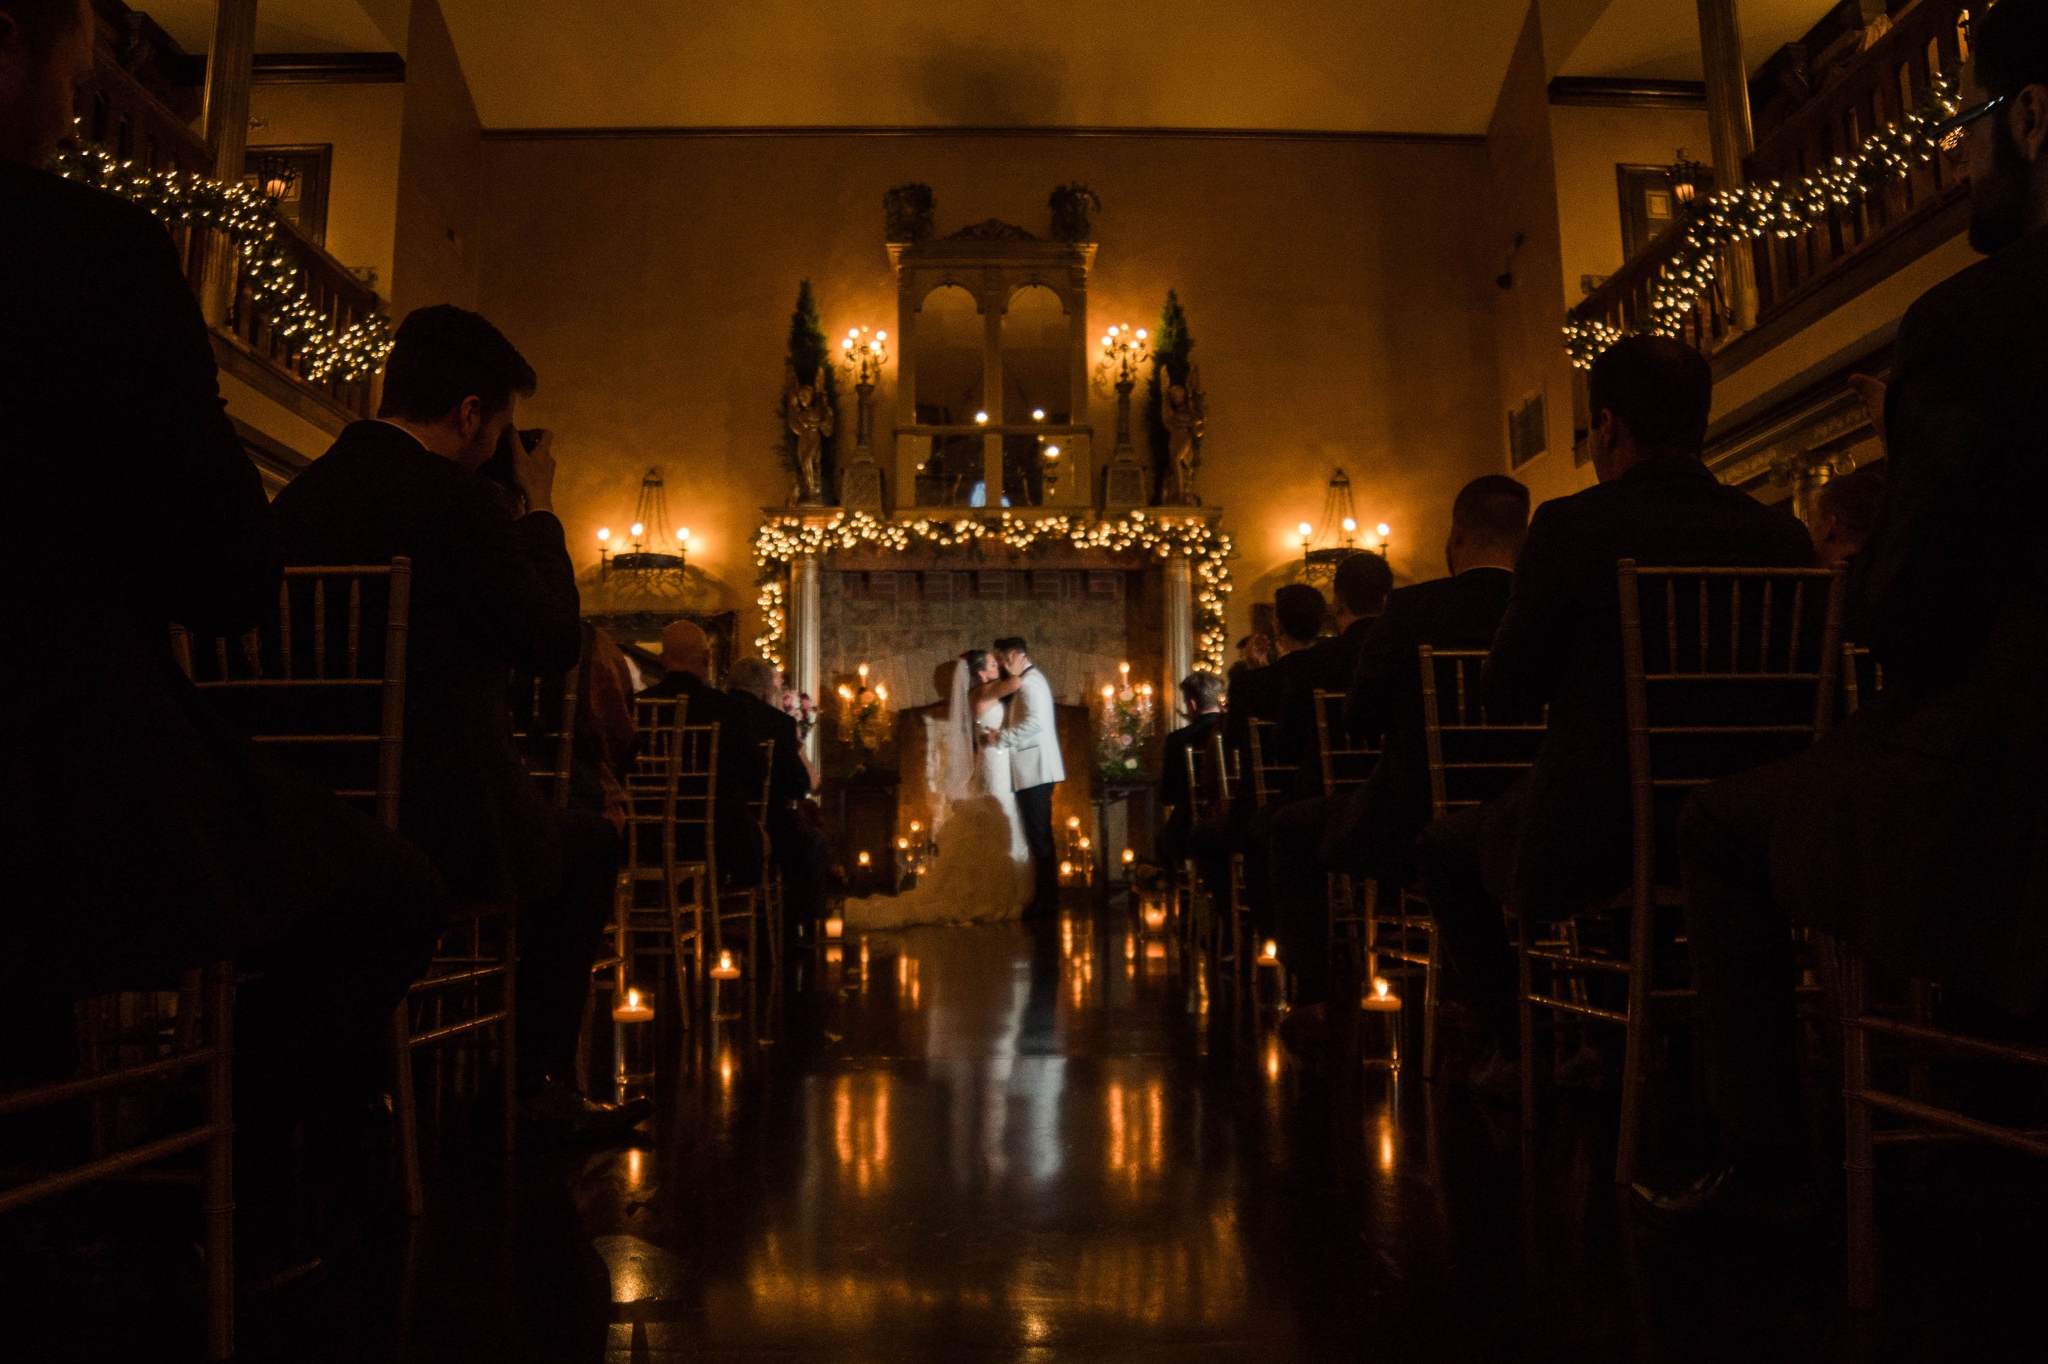 First kiss in a castle lit by candles during the wedding ceremony - Honolulu Oahu Hawaii Wedding Photographer